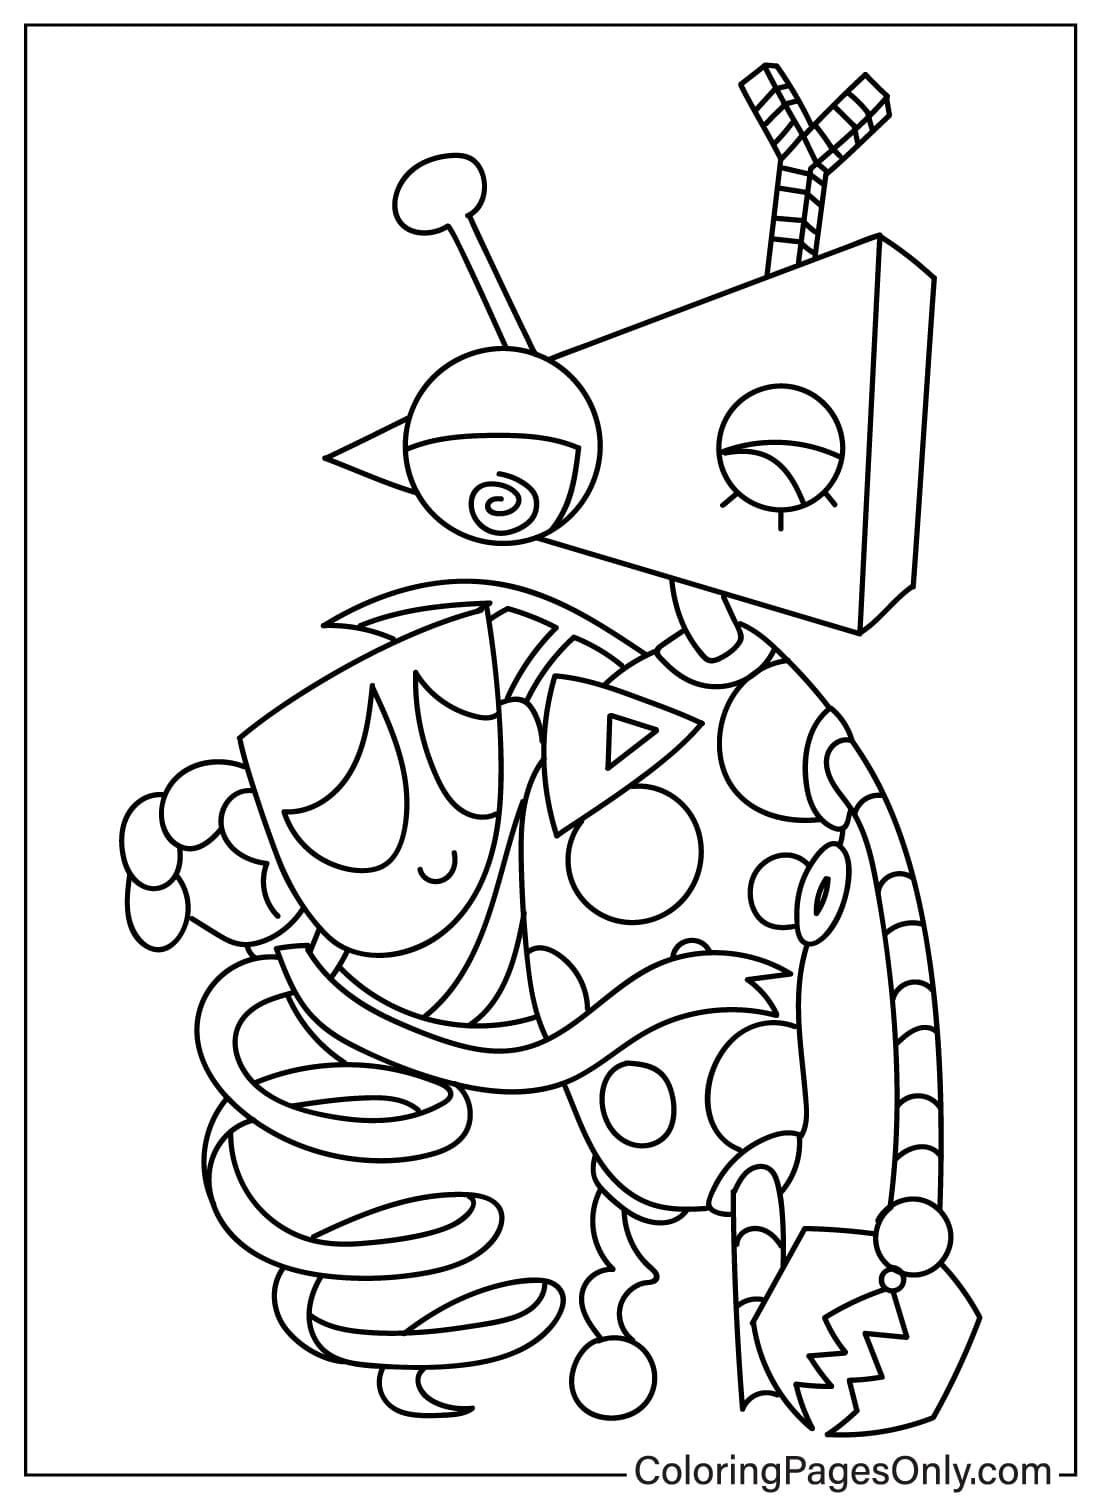 Gangle and Zooble Coloring Page from The Amazing Digital Circus